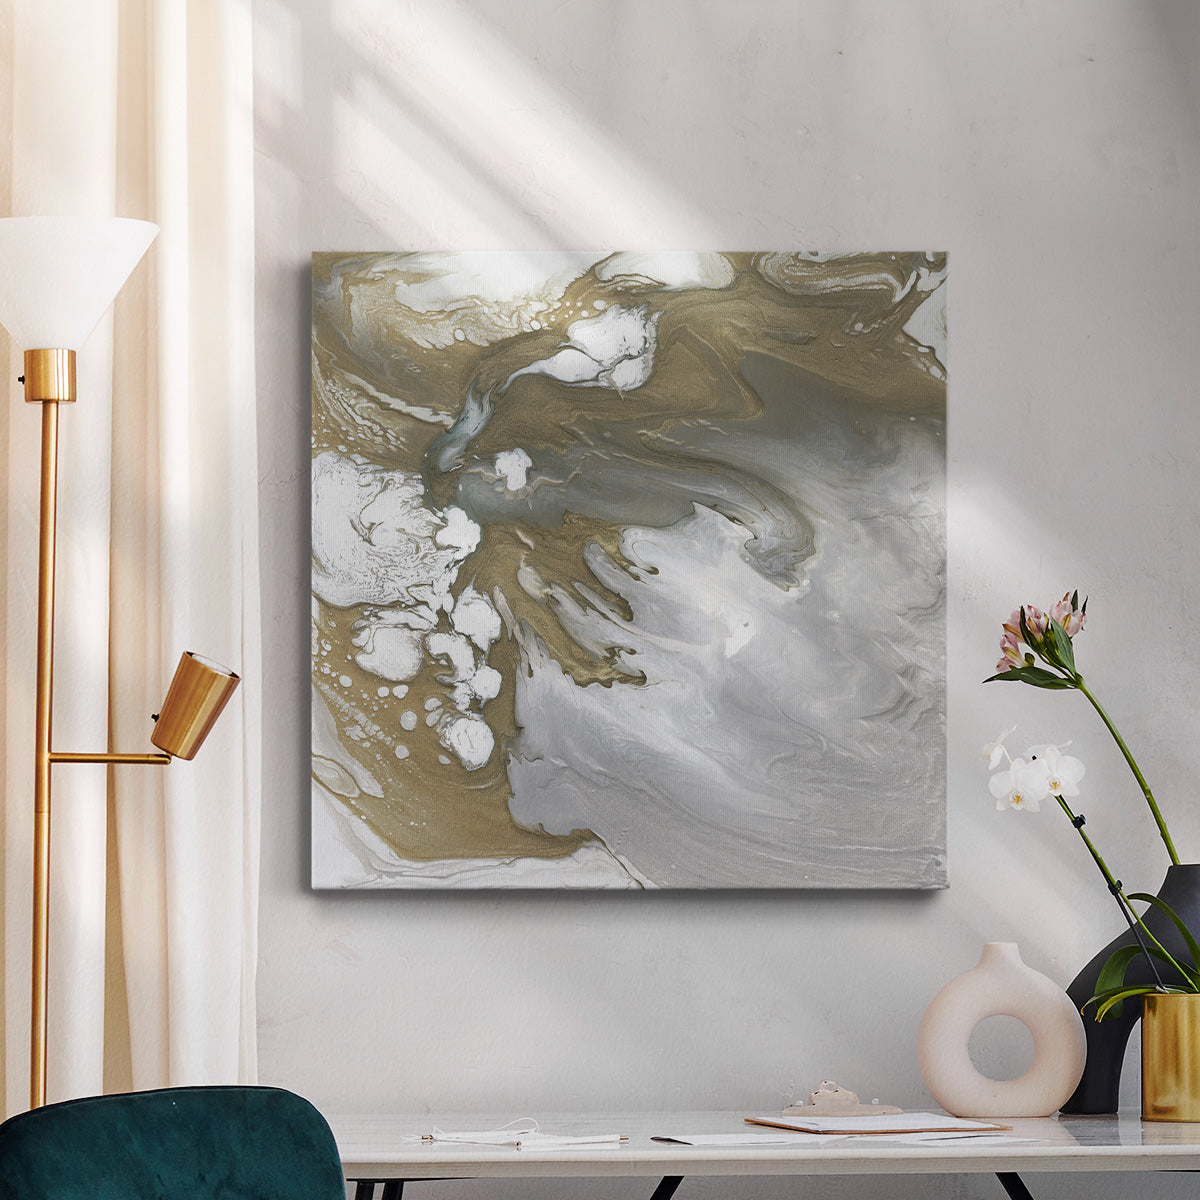 Hydrous-Premium Gallery Wrapped Canvas - Ready to Hang